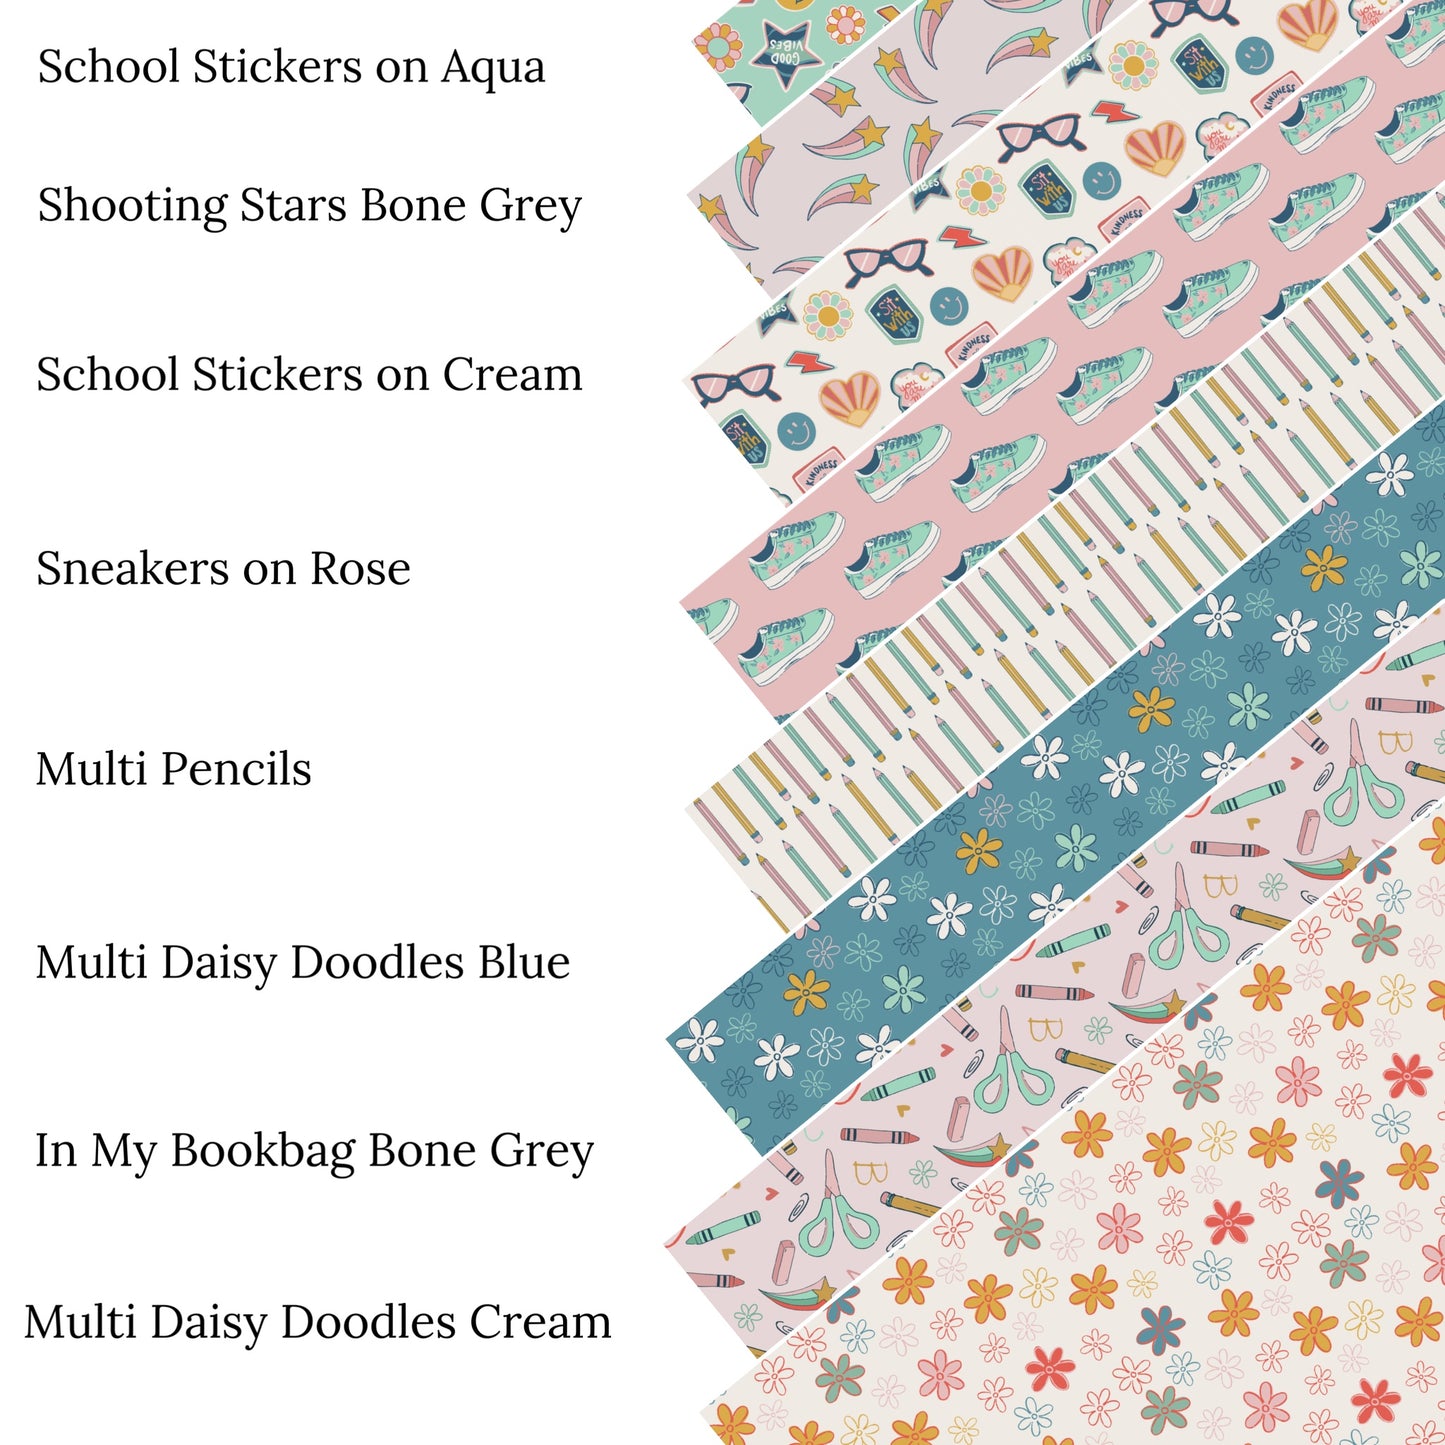 School Stickers on Aqua Faux Leather Sheets